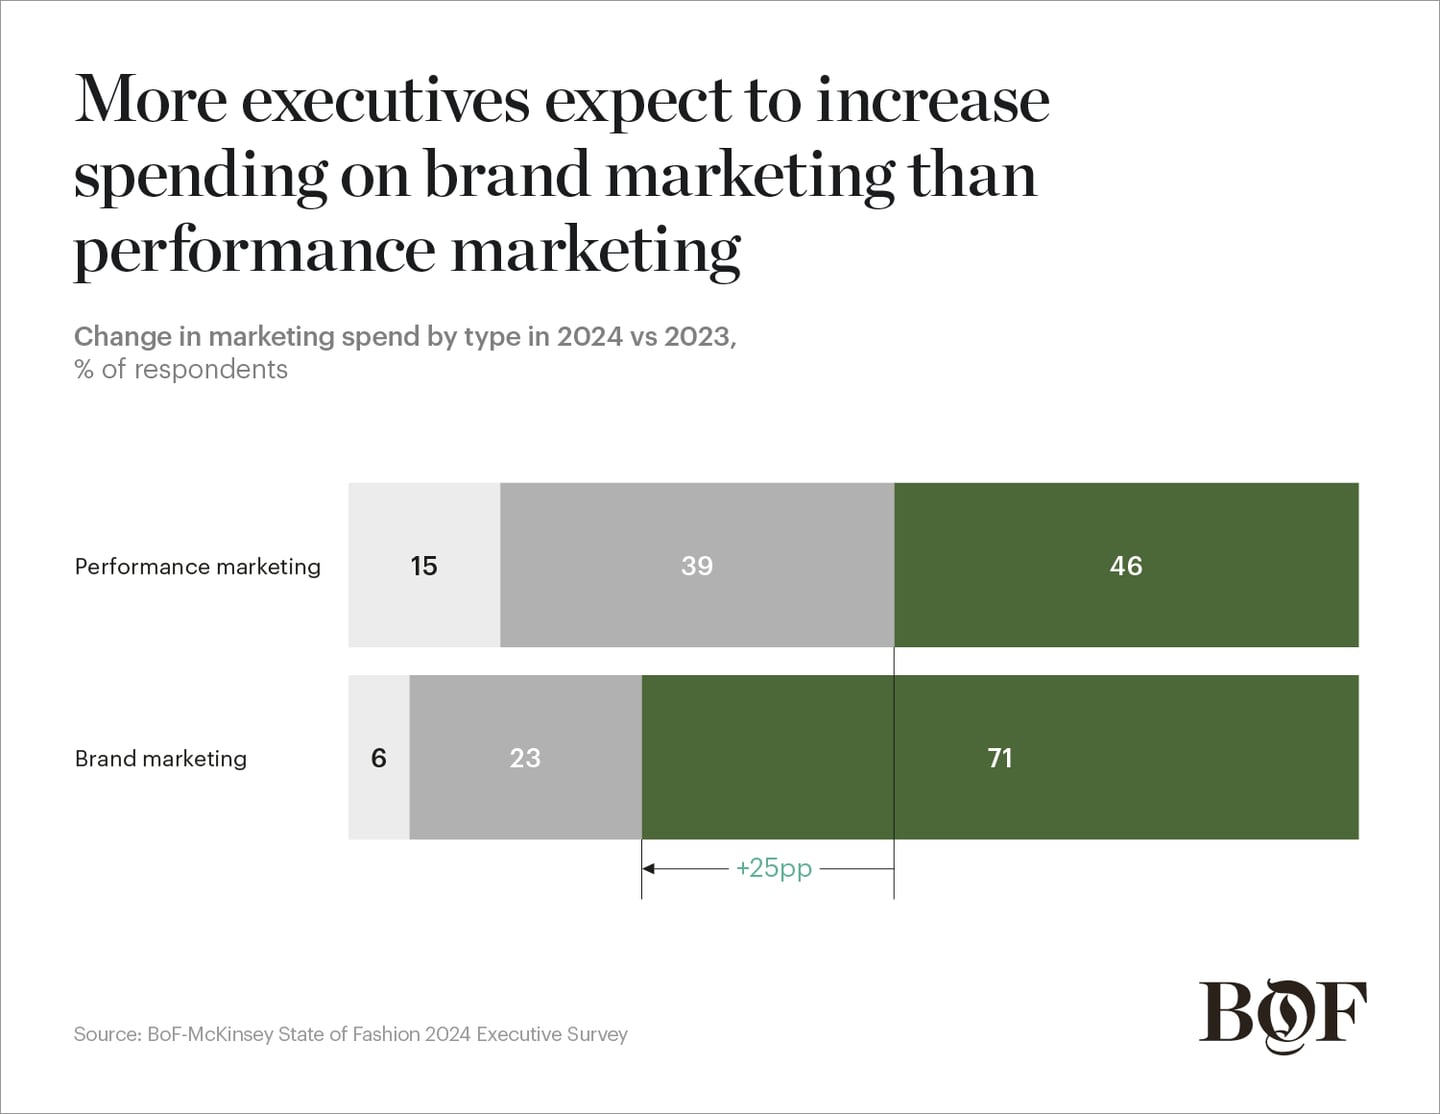 More executives expect to increase spending on brand marketing than performance marketing